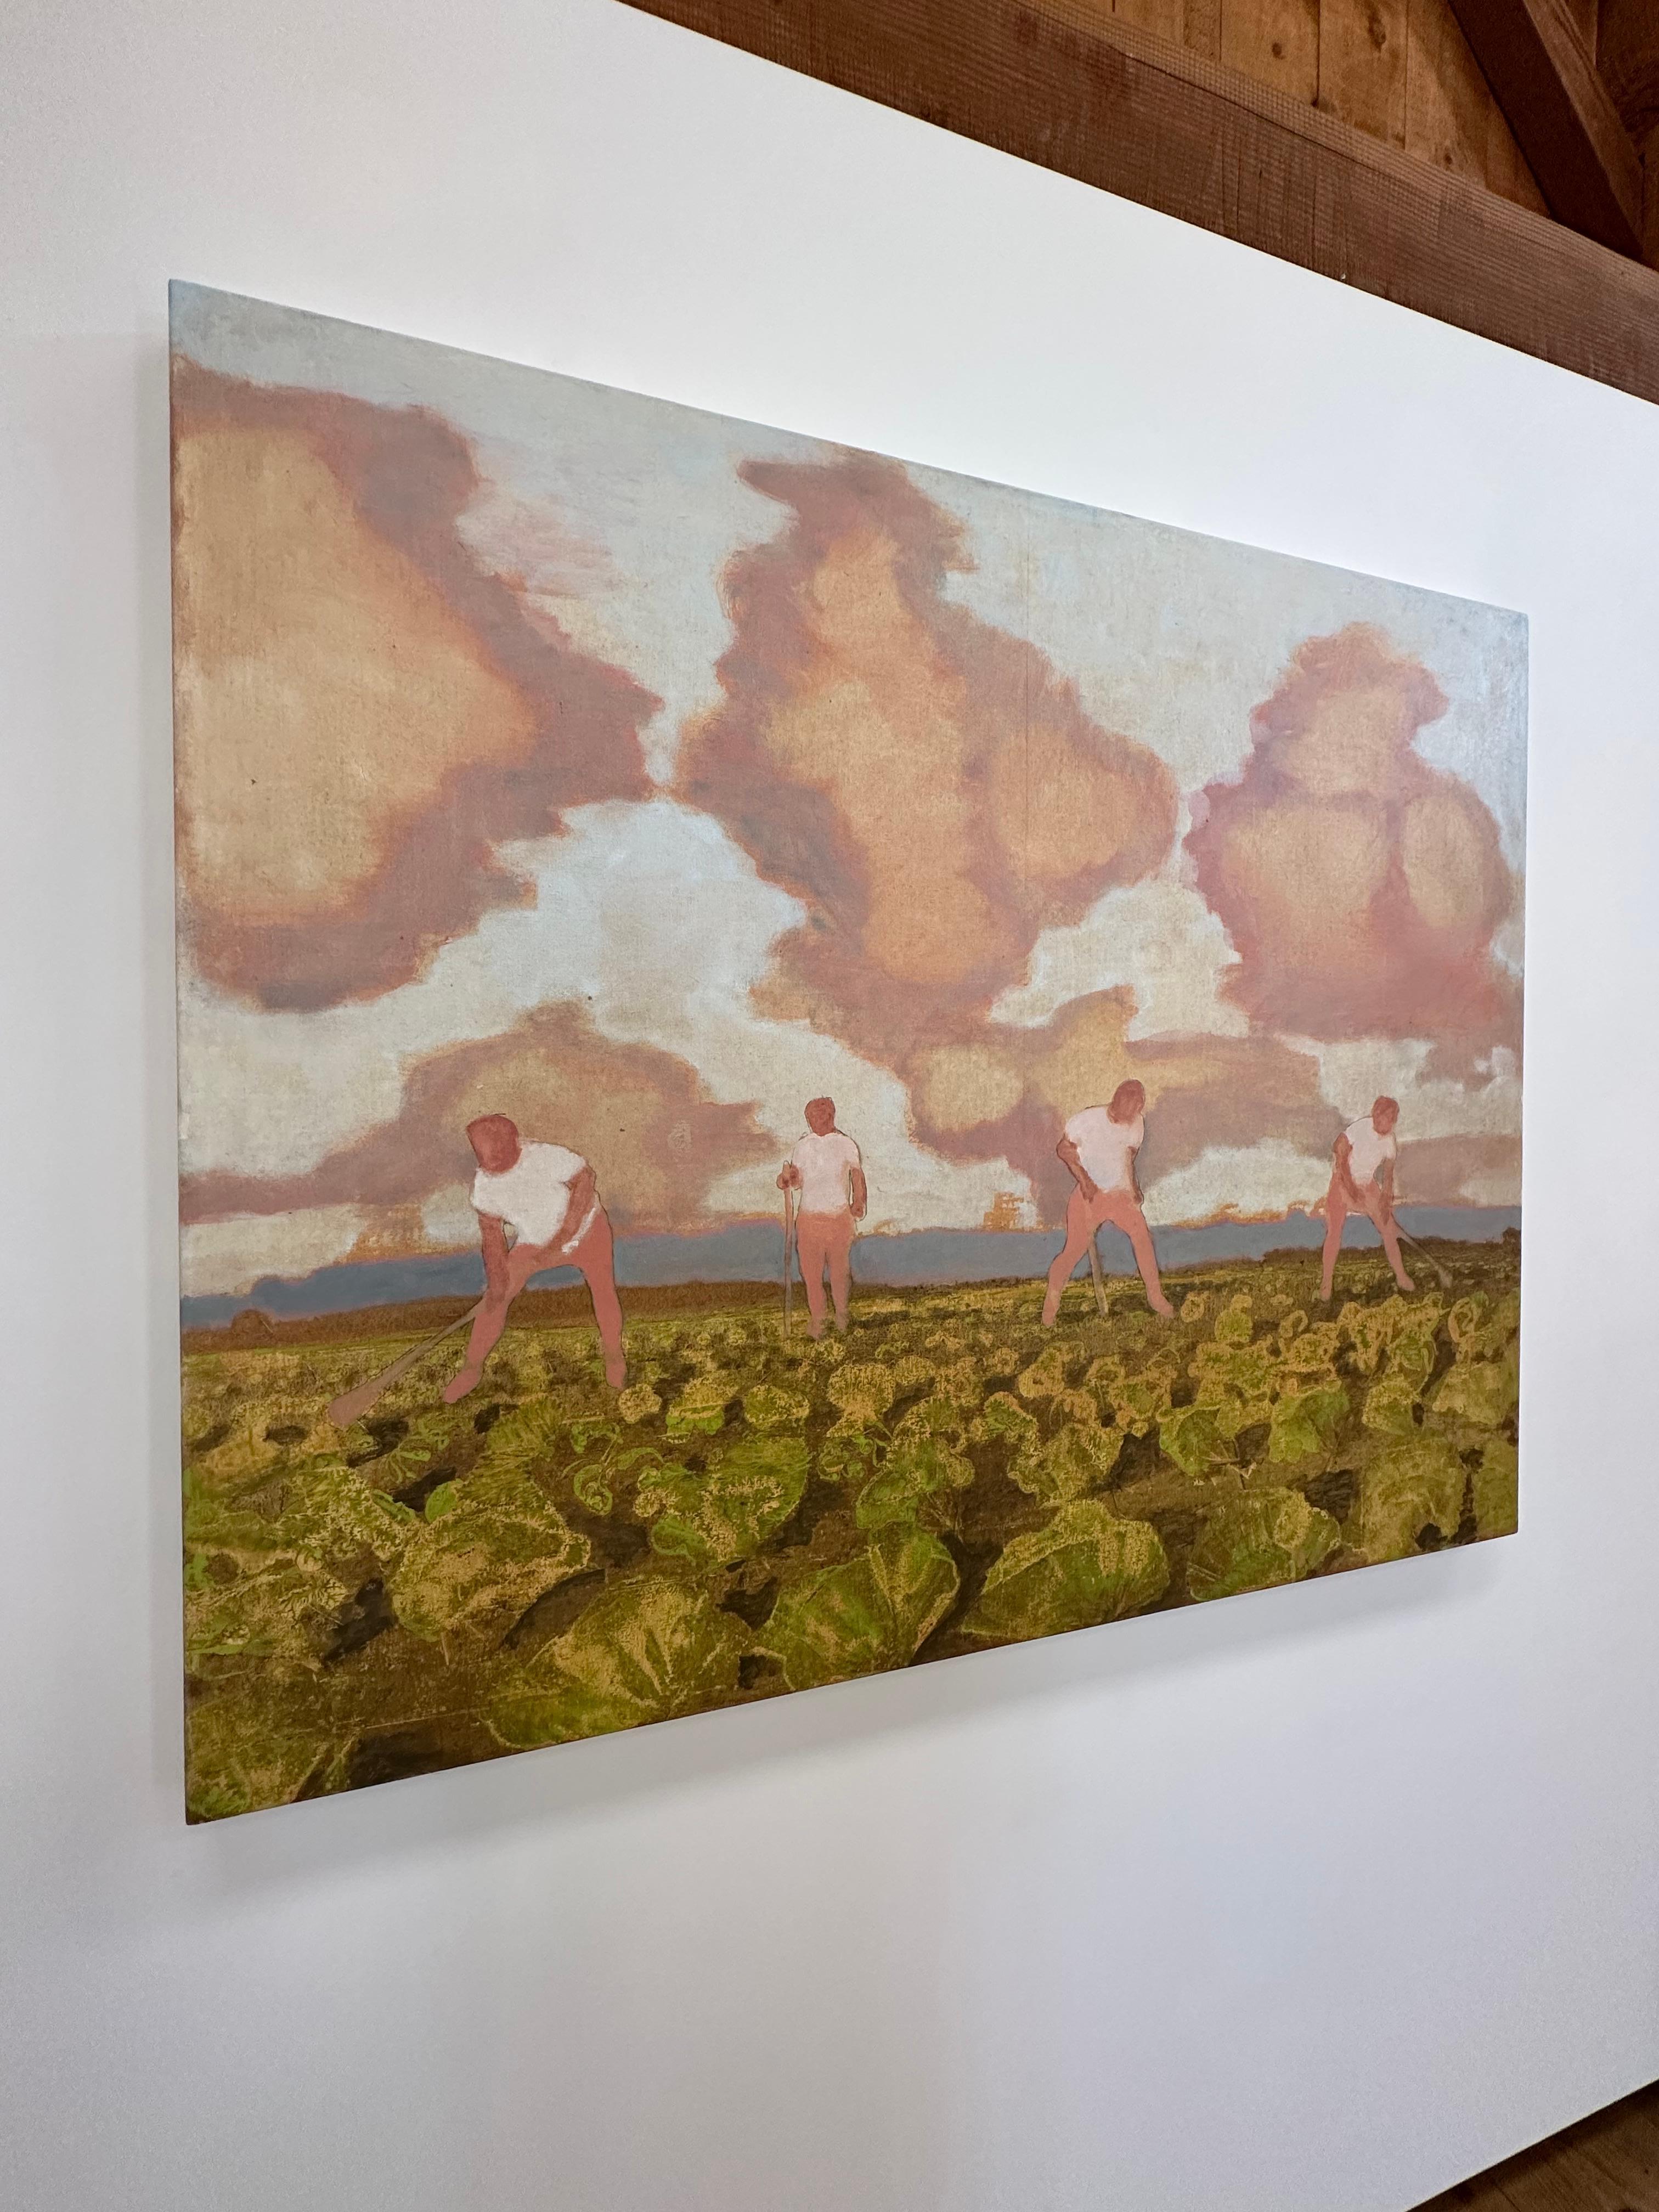 Cabbage Field, Farmers in Green and Ochre Vegetable Field, Gray, Salmon Pink Sky - Painting by David Konigsberg